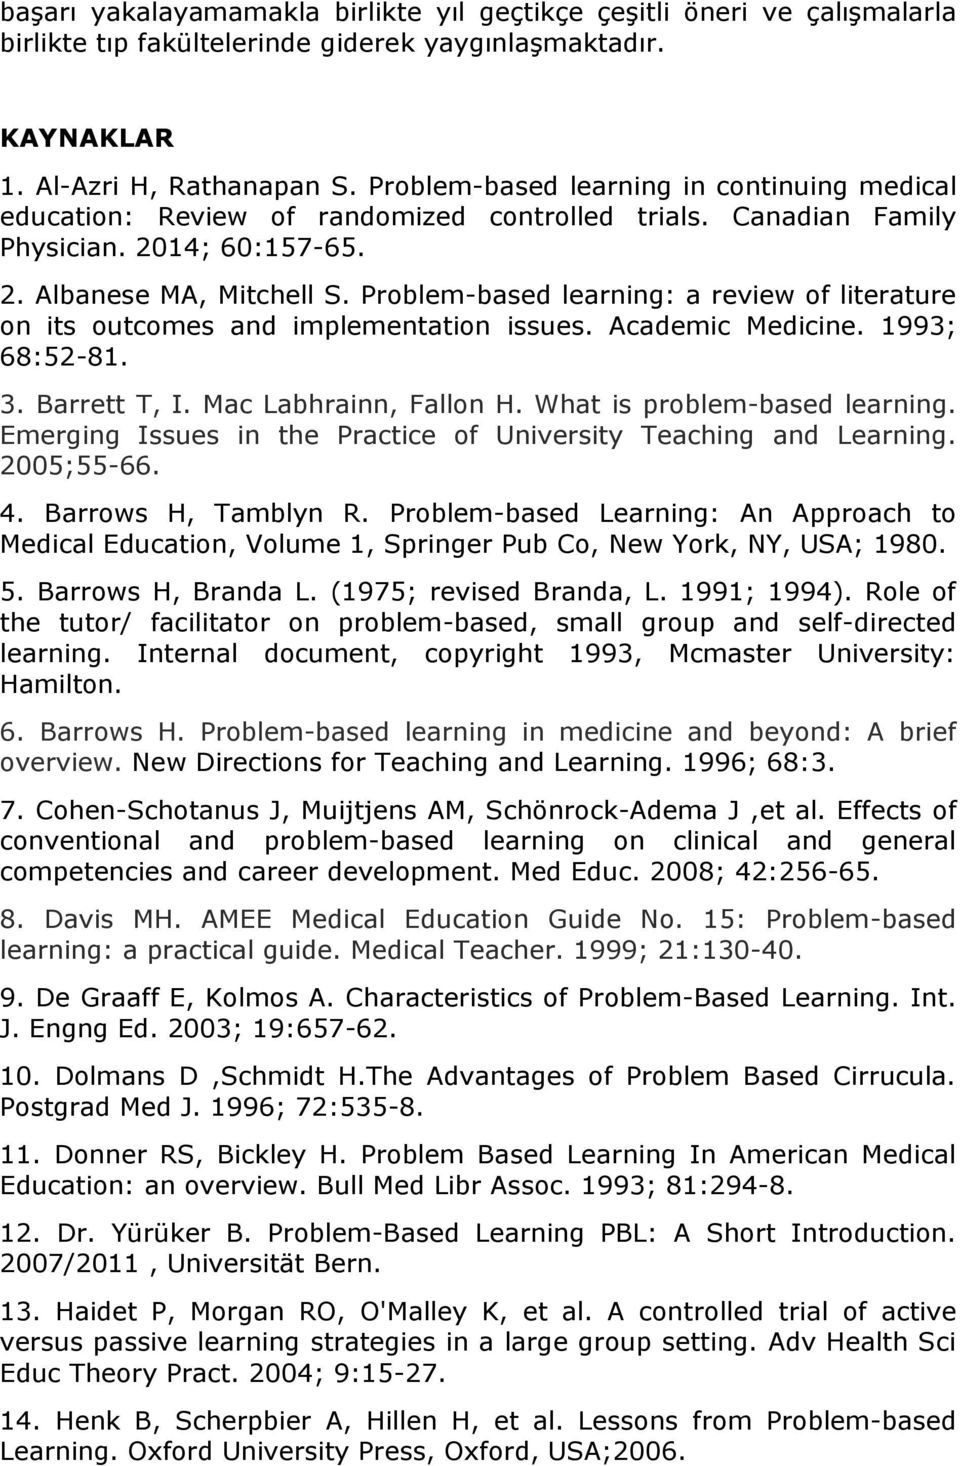 Problem-based learning: a review of literature on its outcomes and implementation issues. Academic Medicine. 1993; 68:52-81. 3. Barrett T, I. Mac Labhrainn, Fallon H. What is problem-based learning.